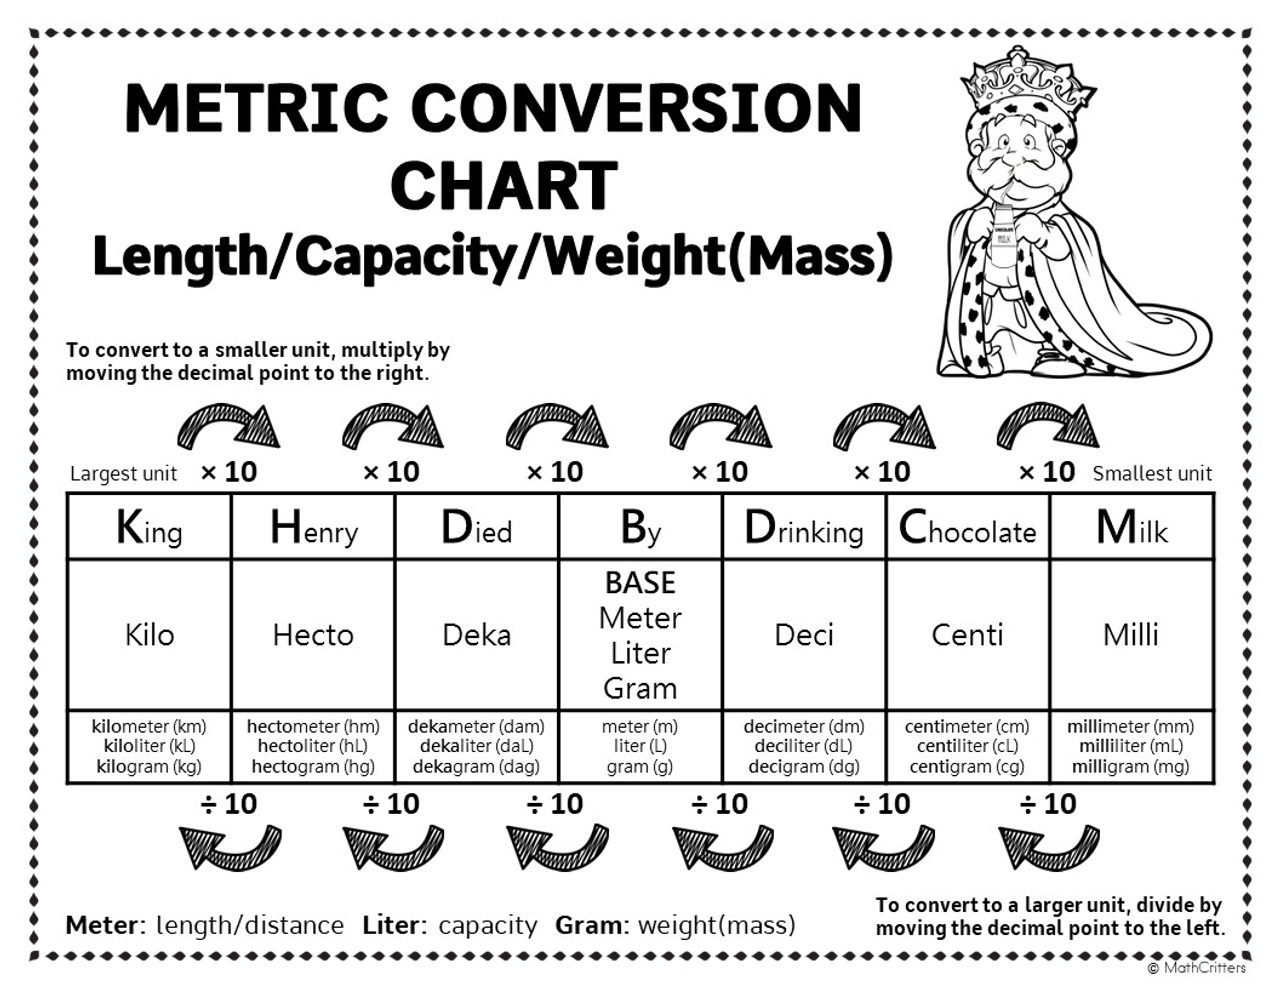 Metric System Worksheets And Conversion Chart King Henry Died By Drinking Chocolate Milk